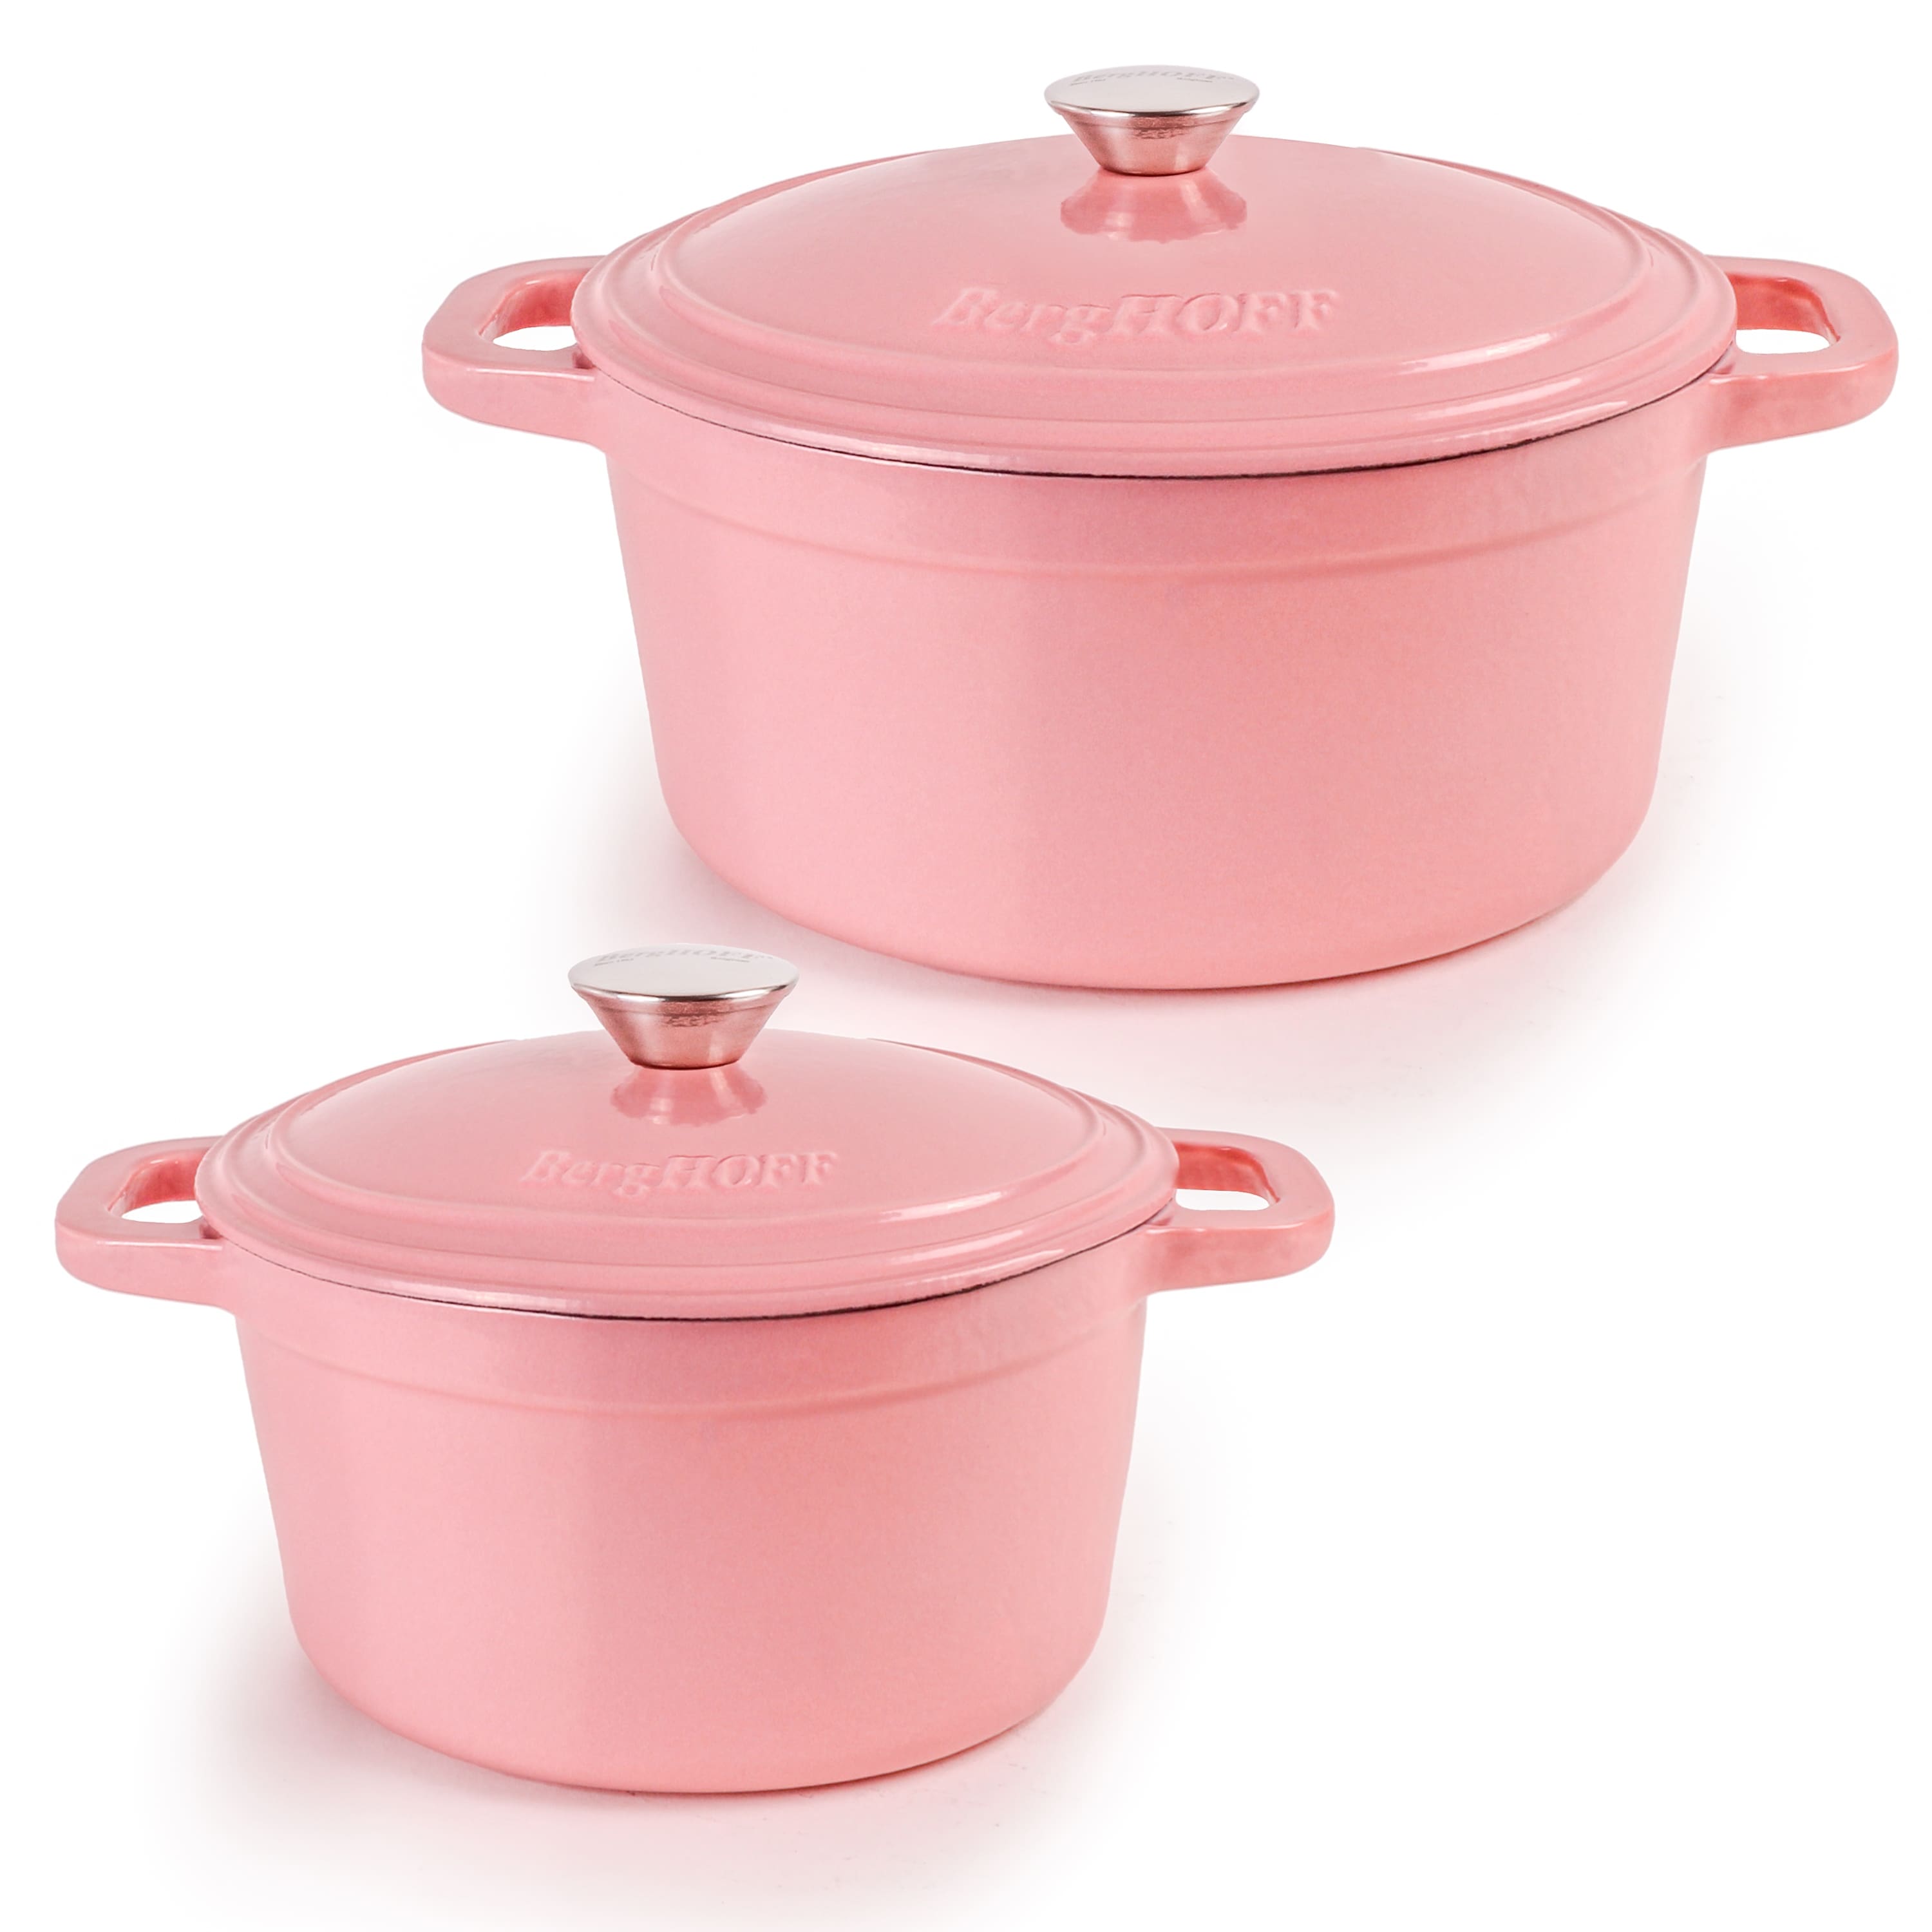 https://ak1.ostkcdn.com/images/products/is/images/direct/39812be971e96ca8d75295d1a6dadd22f2848780/Neo-4pc-Cast-Iron-Set-3qt-Covered-Dutch-Oven-%26-7qt-Covered-Stockpot-Pink.jpg